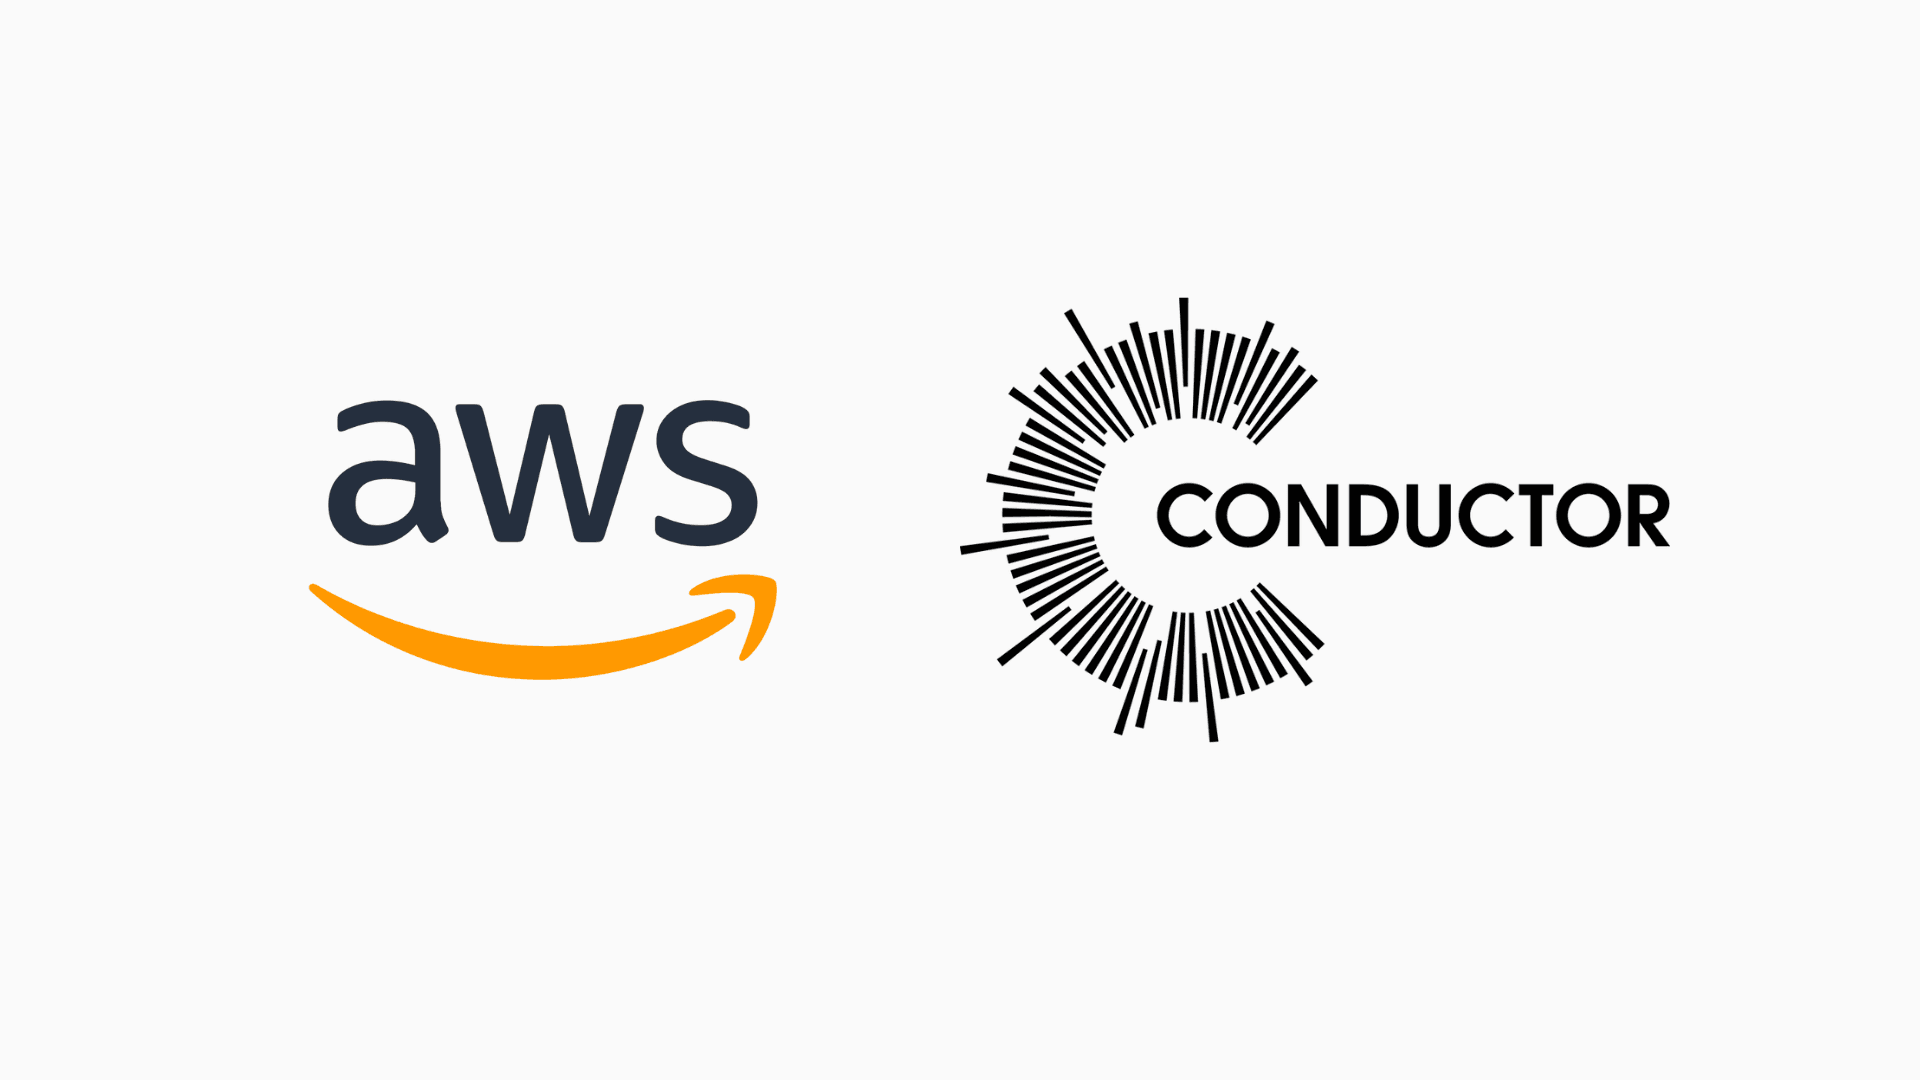 Product Amazon Web Services (AWS) and Deadline | Conductor image